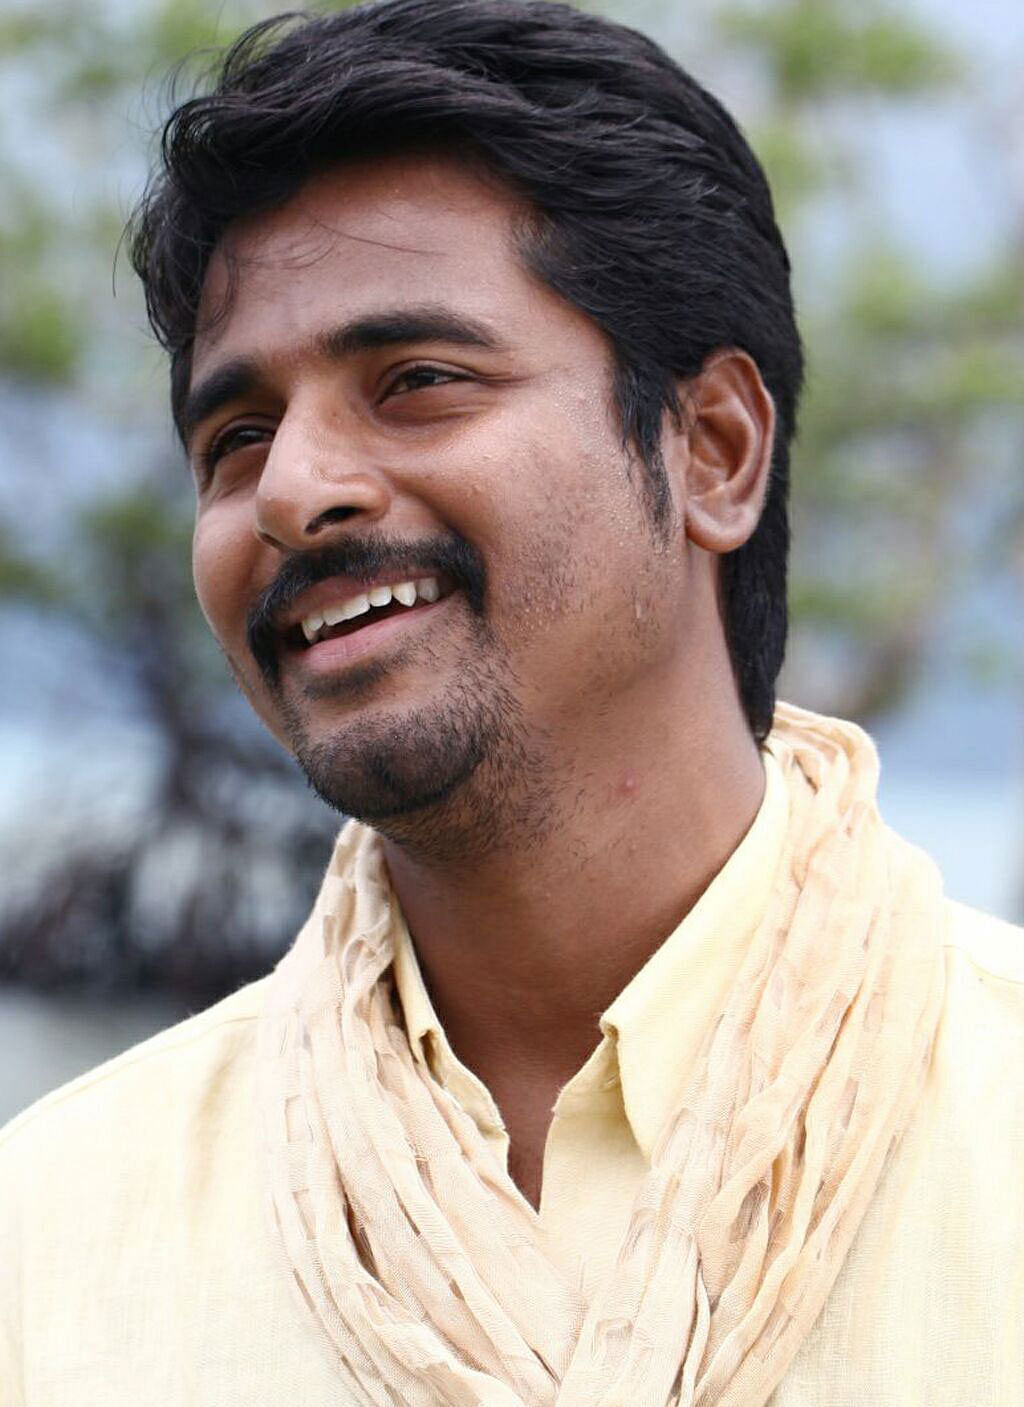 COVID-19: Sivakarthikeyan urges people to respect doctors, says they are ‘gods among us’